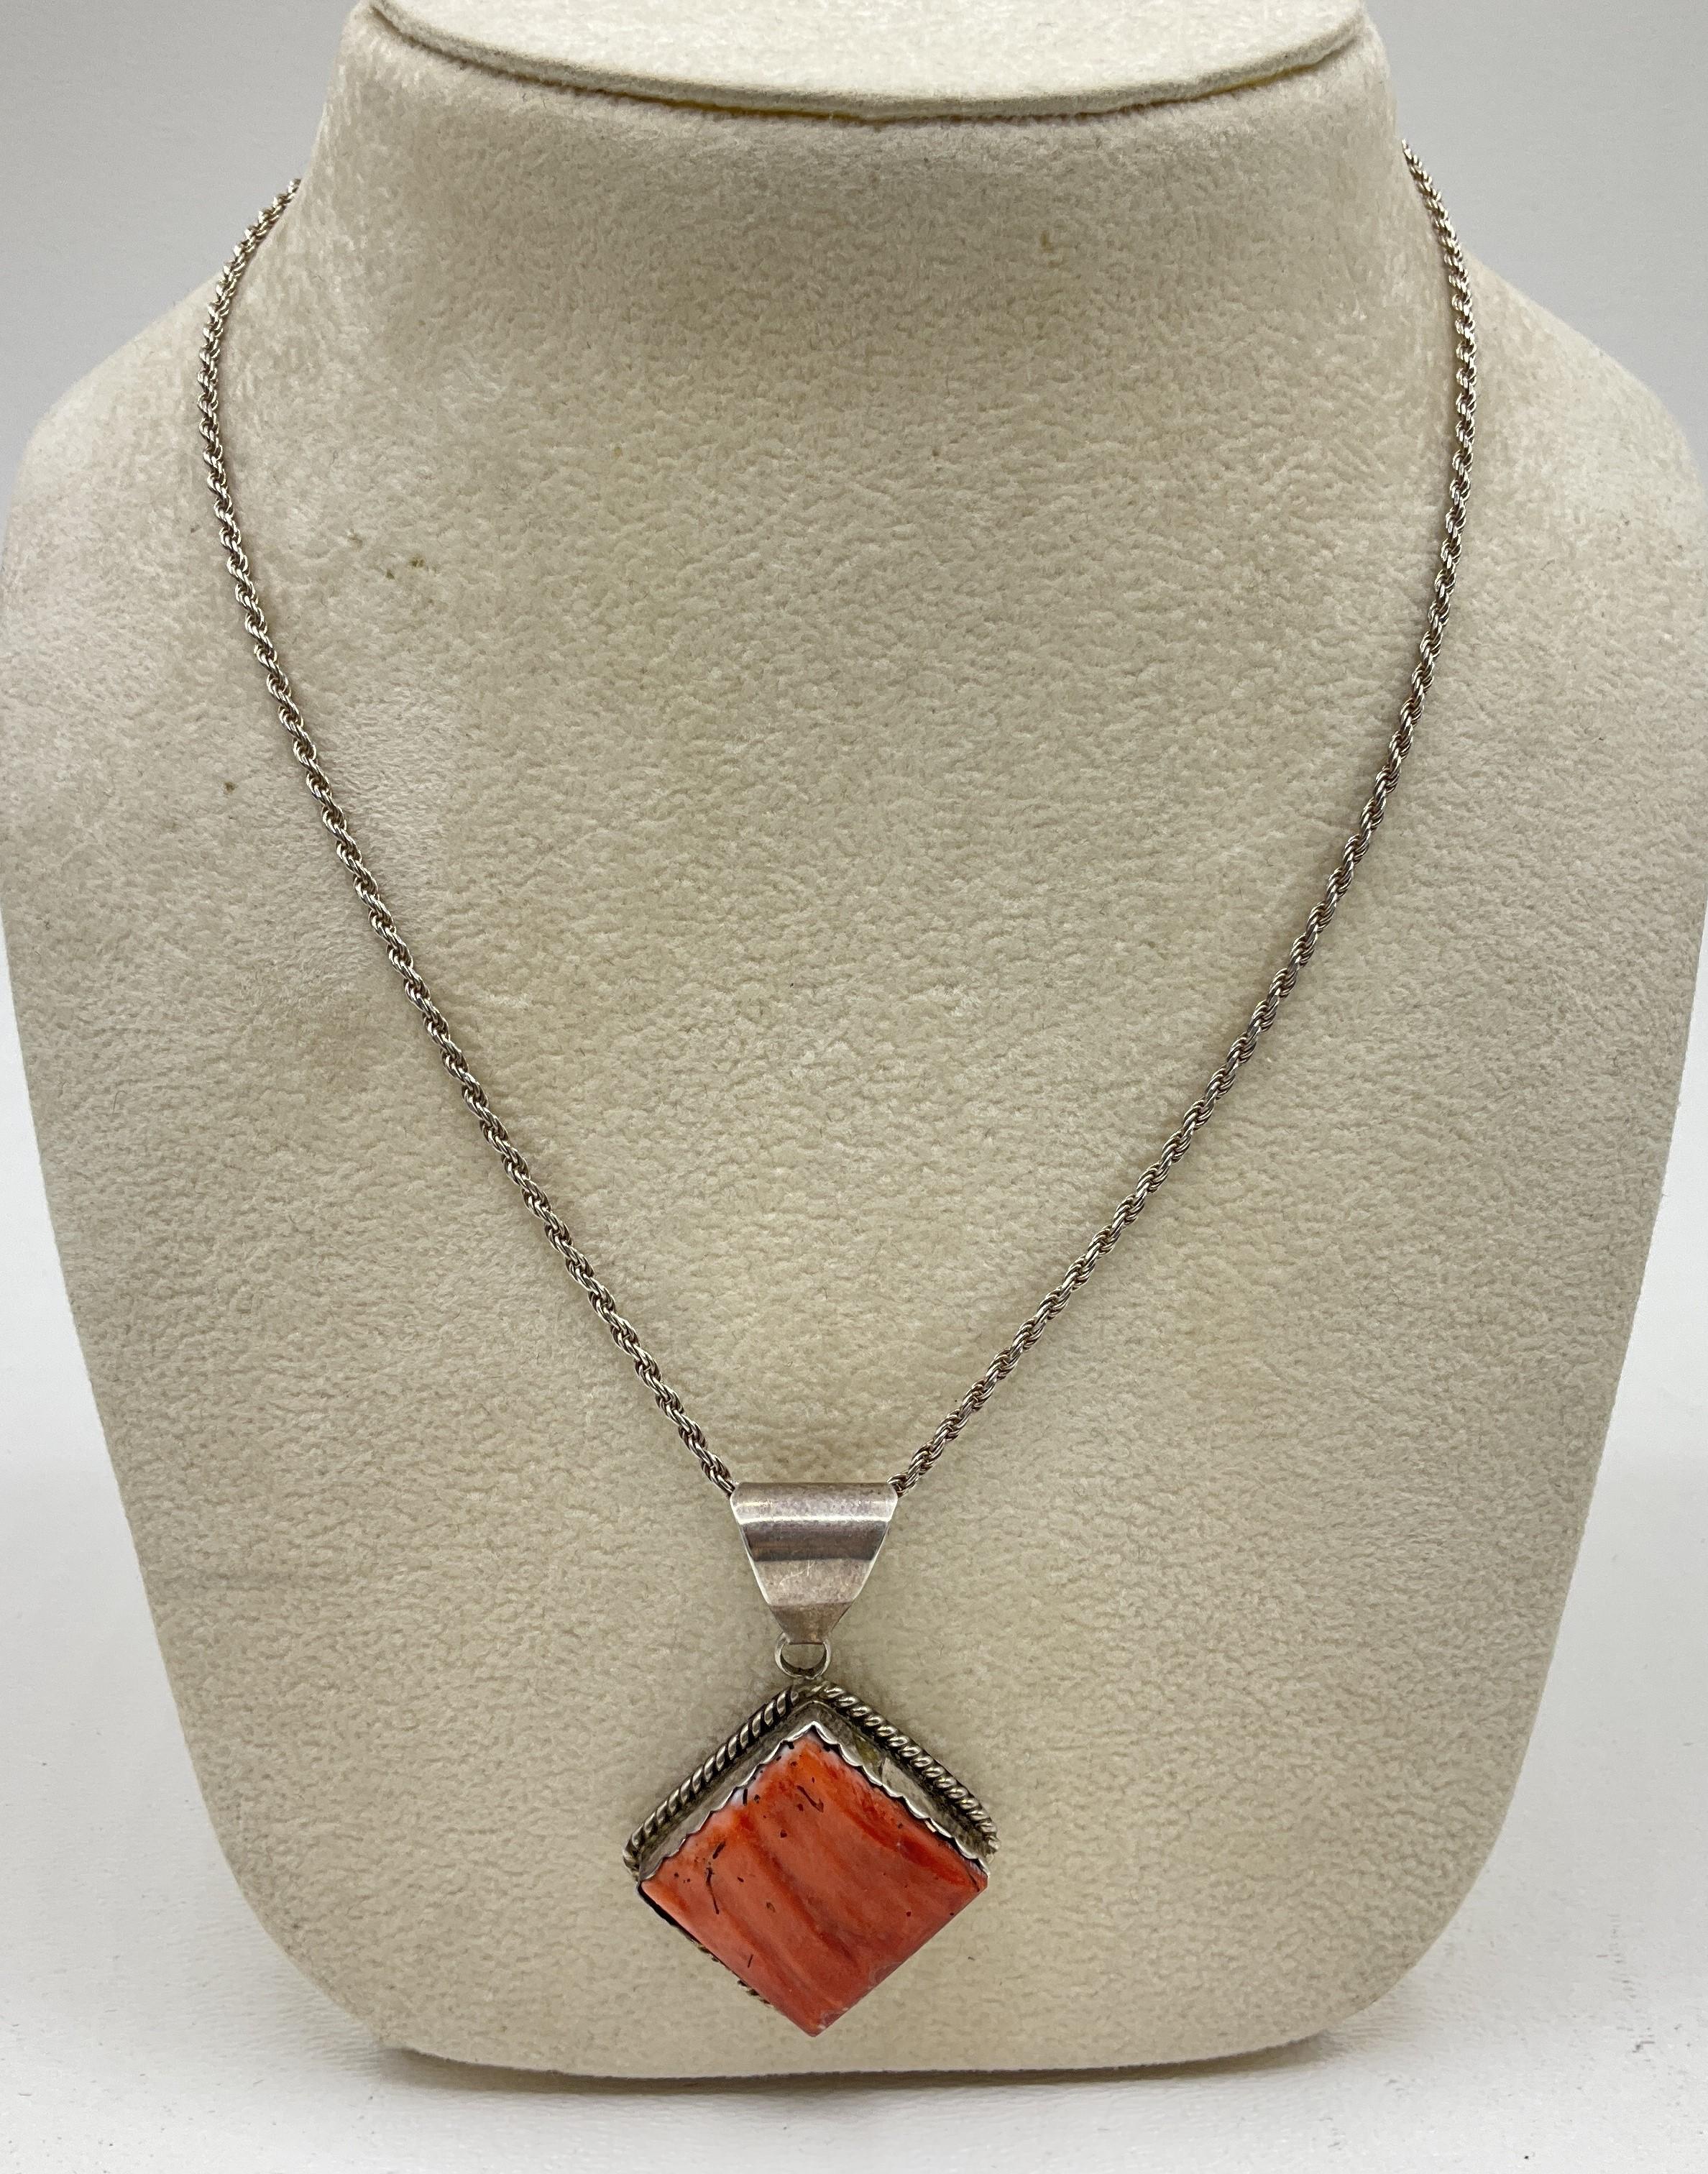 12.4g .925 Sterling Necklace 16"